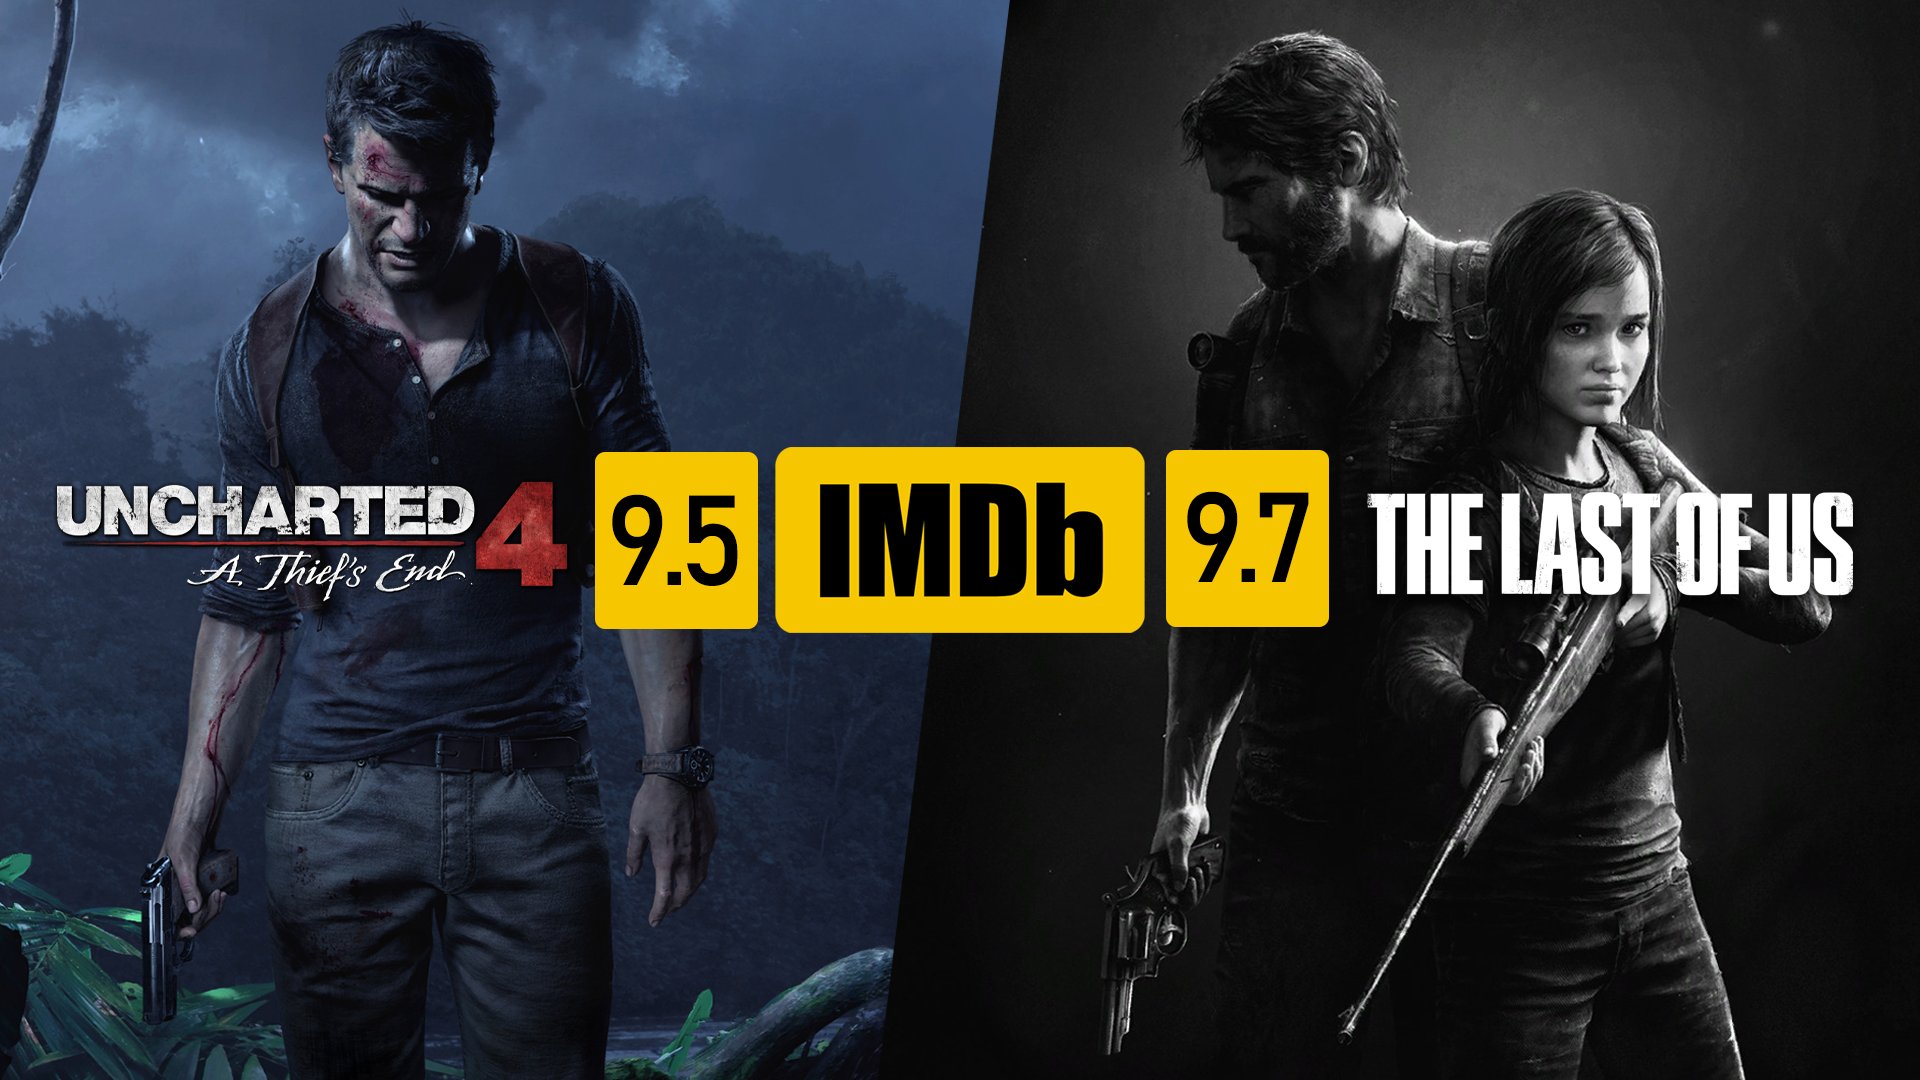 Last Of Us Imdb Naughty Dog Info on Twitter: "Uncharted 4 has an IMDb score of 9.5 The Last  of Us has an IMDb score of 9.7 This makes them one of the highest rated  video